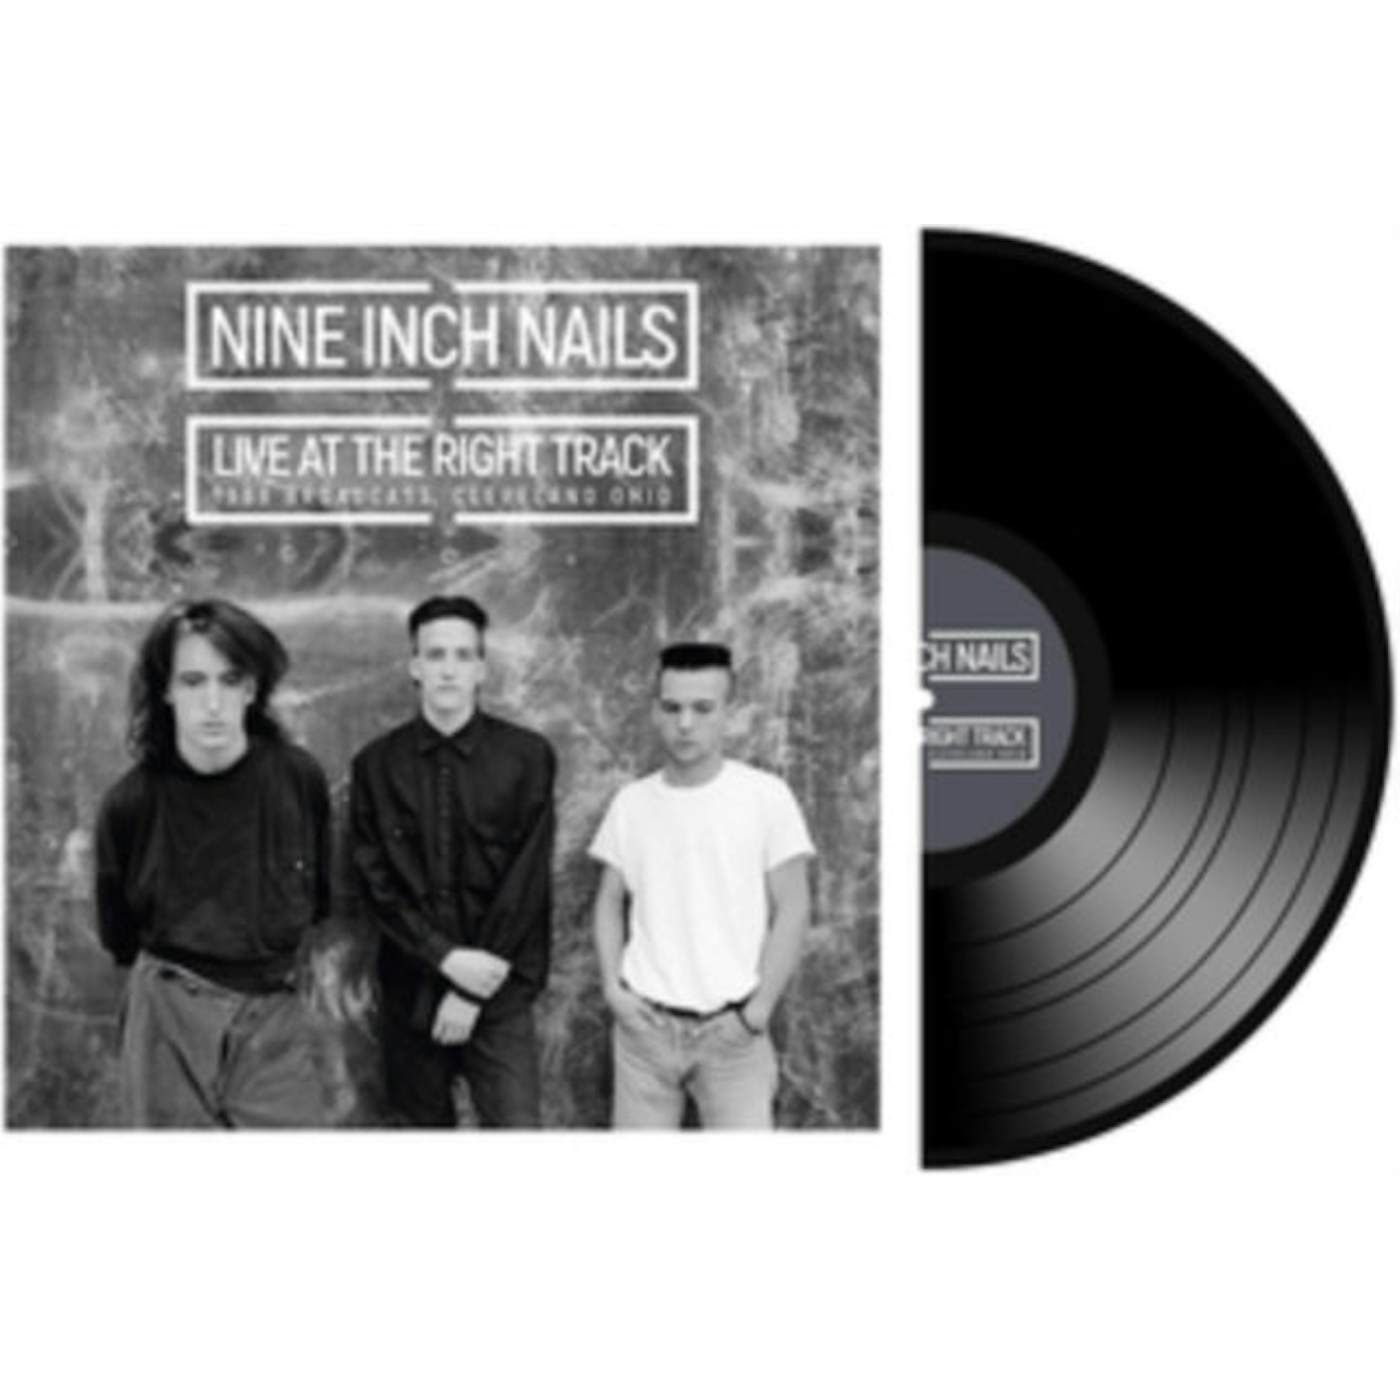 Nine Inch Nails LP - Live At The Right Track (Vinyl)